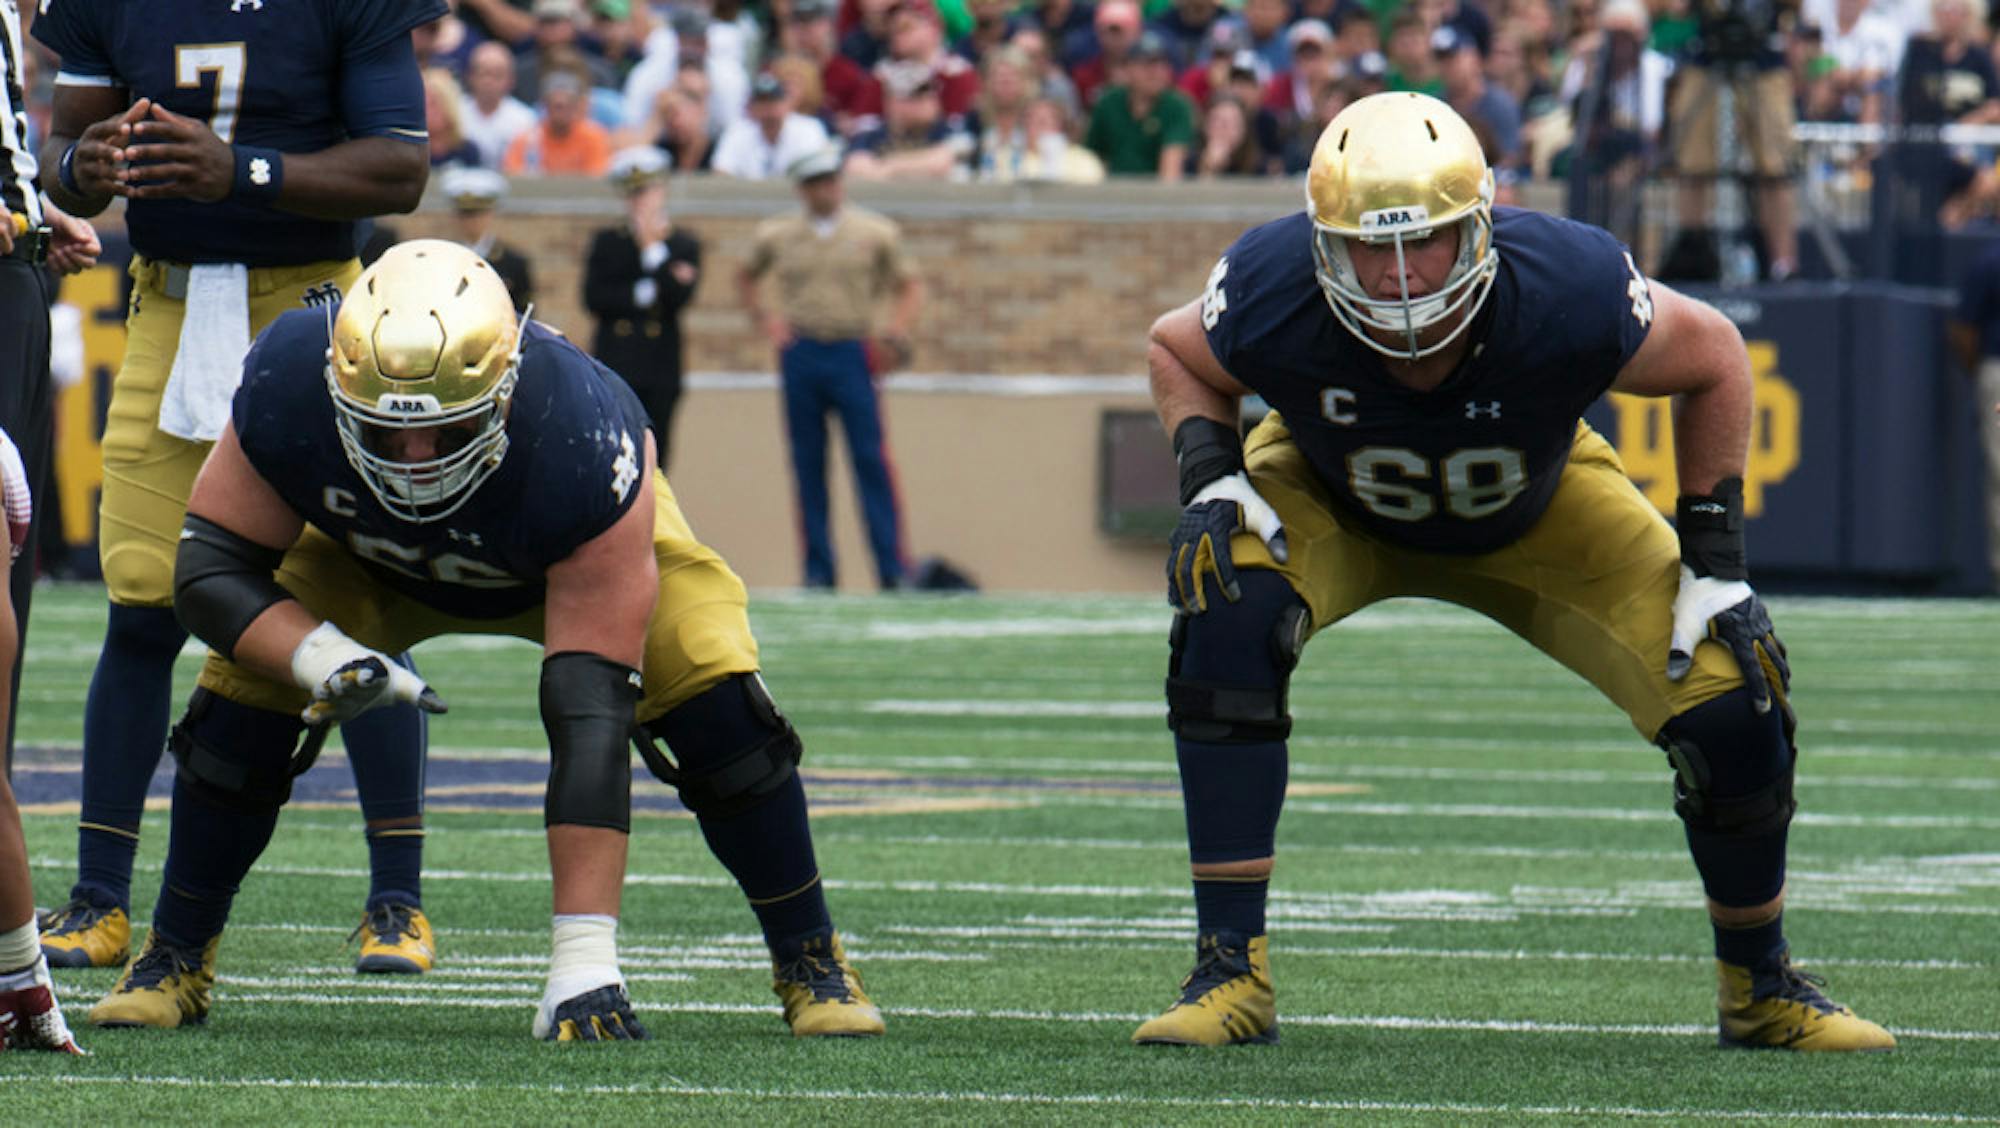 Irish offensive linemen senior Quenton Nelson, left, and graduate student Mike McGlinchey wait for the snap during Notre Dame’s 49-16 win over Temple on Saturday at Notre Dame Stadium.